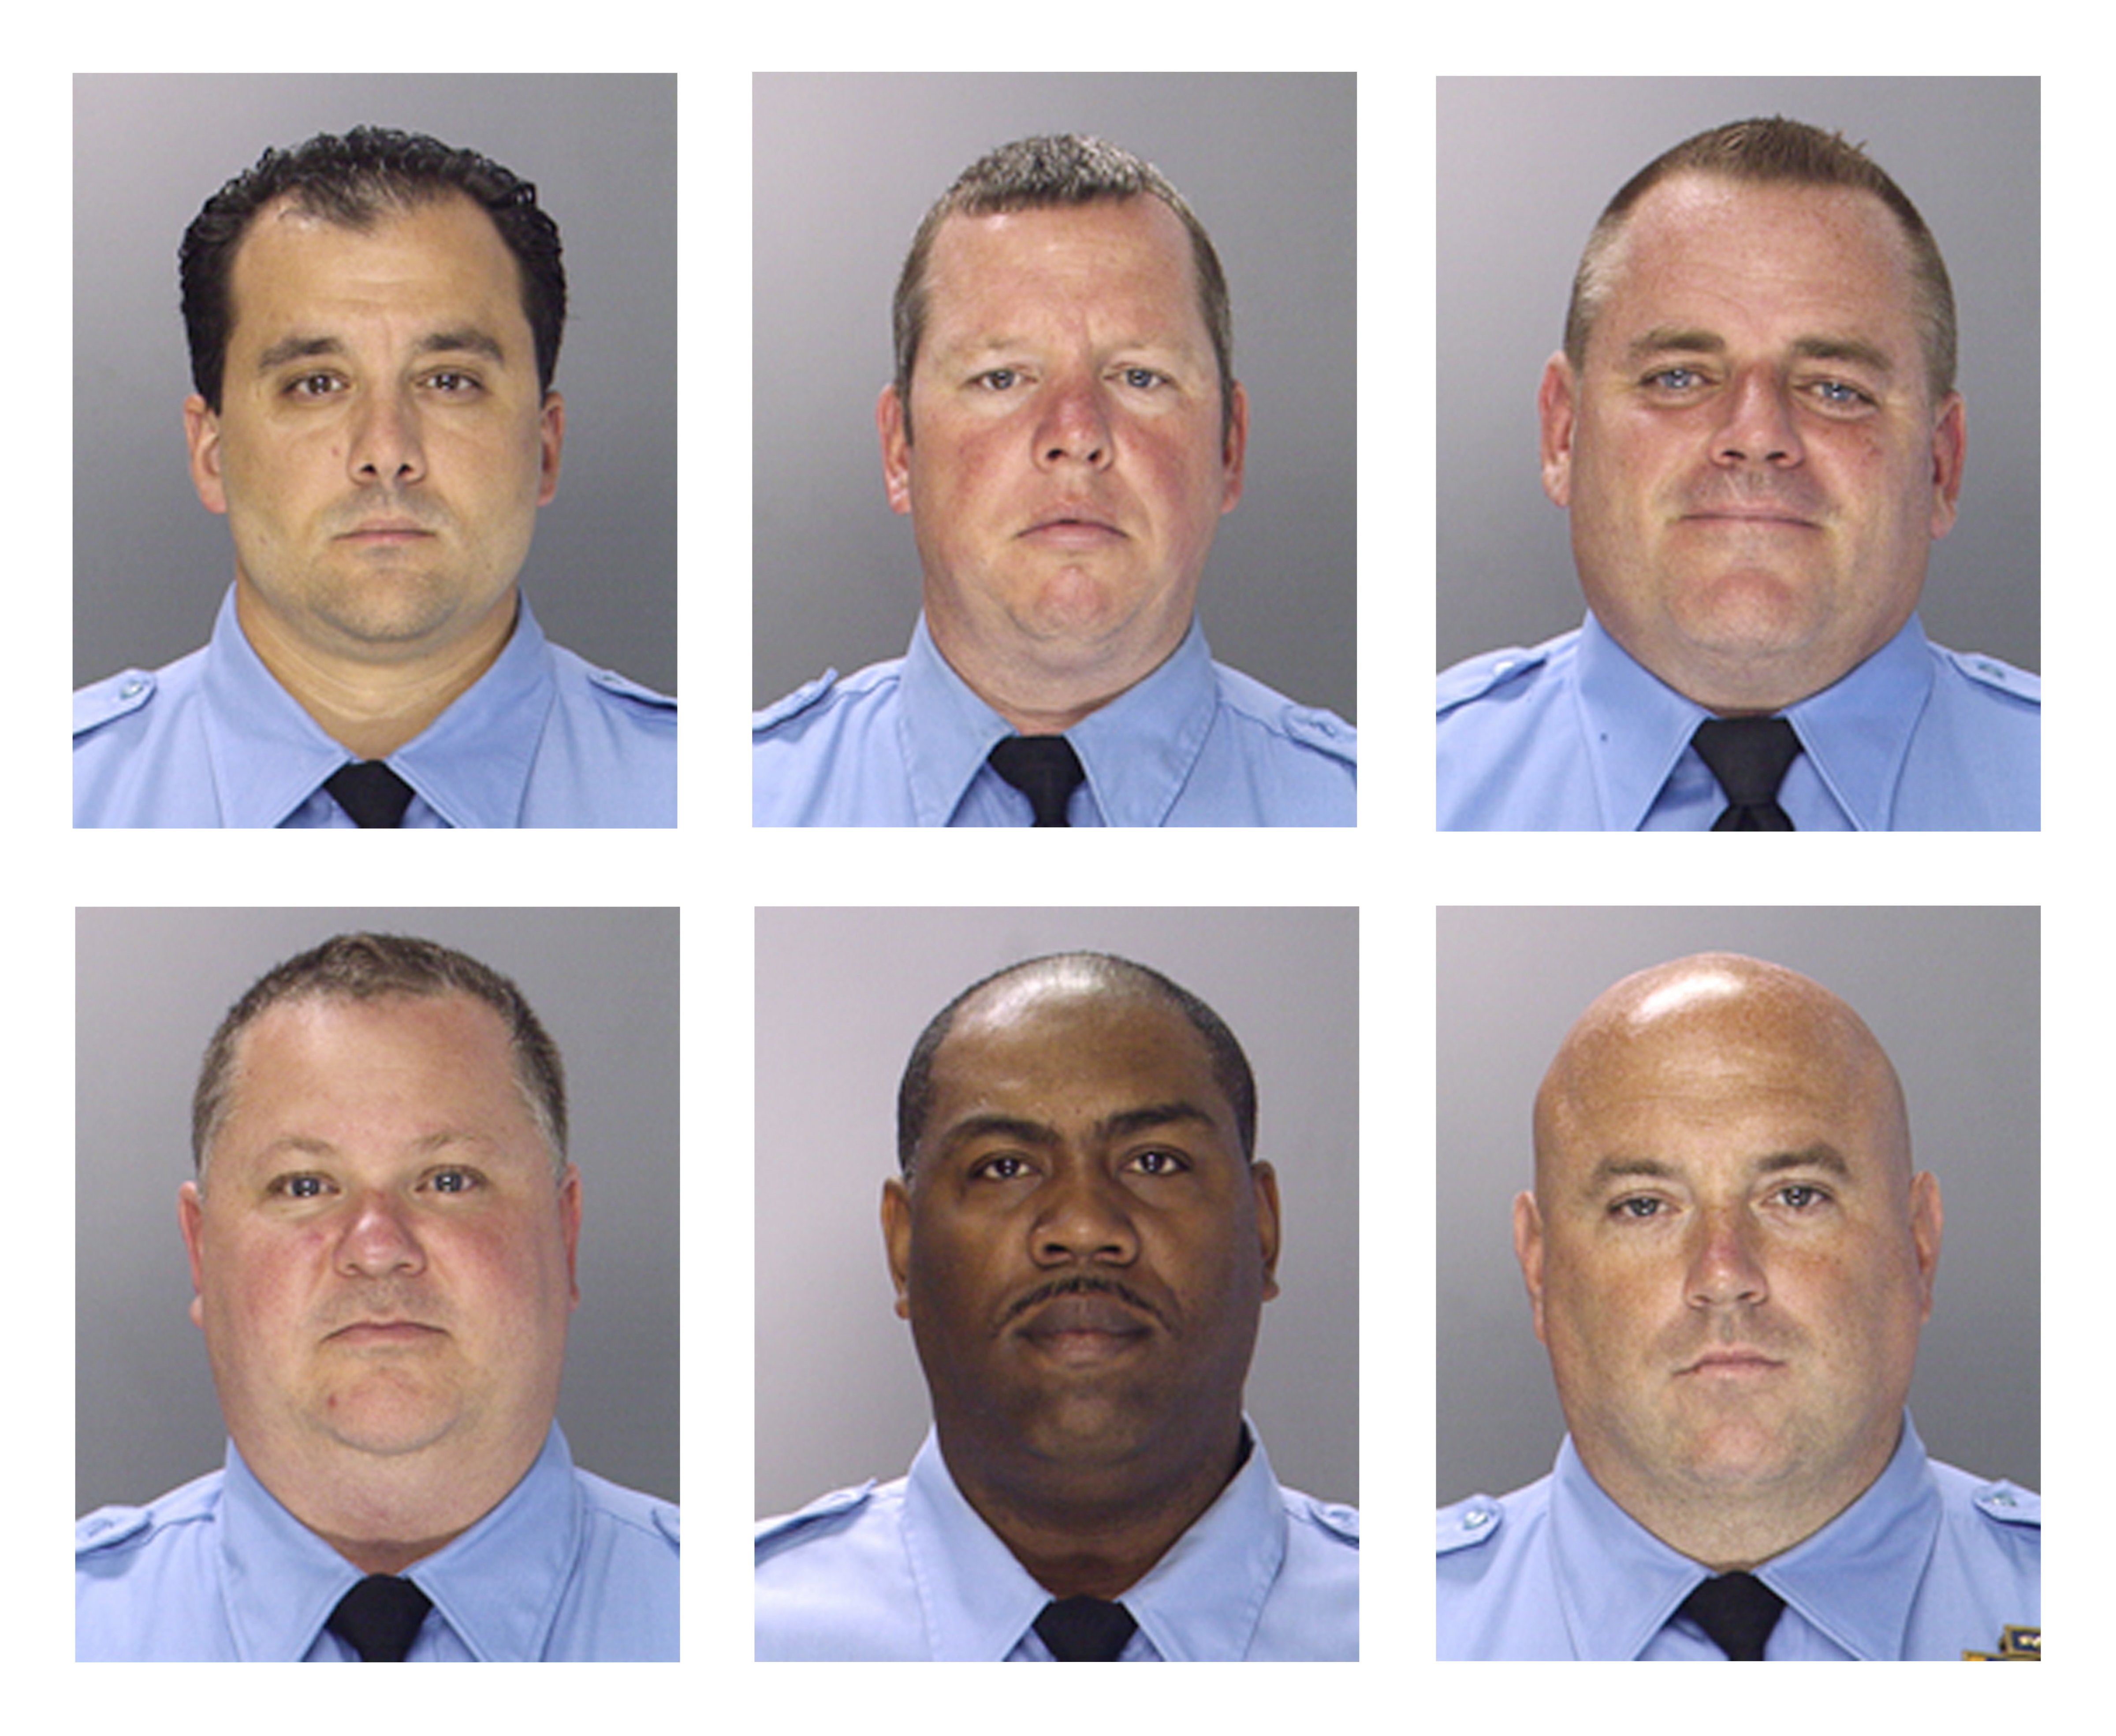 Officers Thomas Liciardello, Brian Reynolds, Michael Spicer, and from bottom left to right, Perry Betts, Linwood Norman and John Speiser were arrested on Wednesday, July 30, 2014. The six narcotics officers are charged with multiple indictments including racketeering conspiracy, extortion, robbery, kidnapping and drug dealing. (Philadelphia Police Department&mdash;Associated Press)